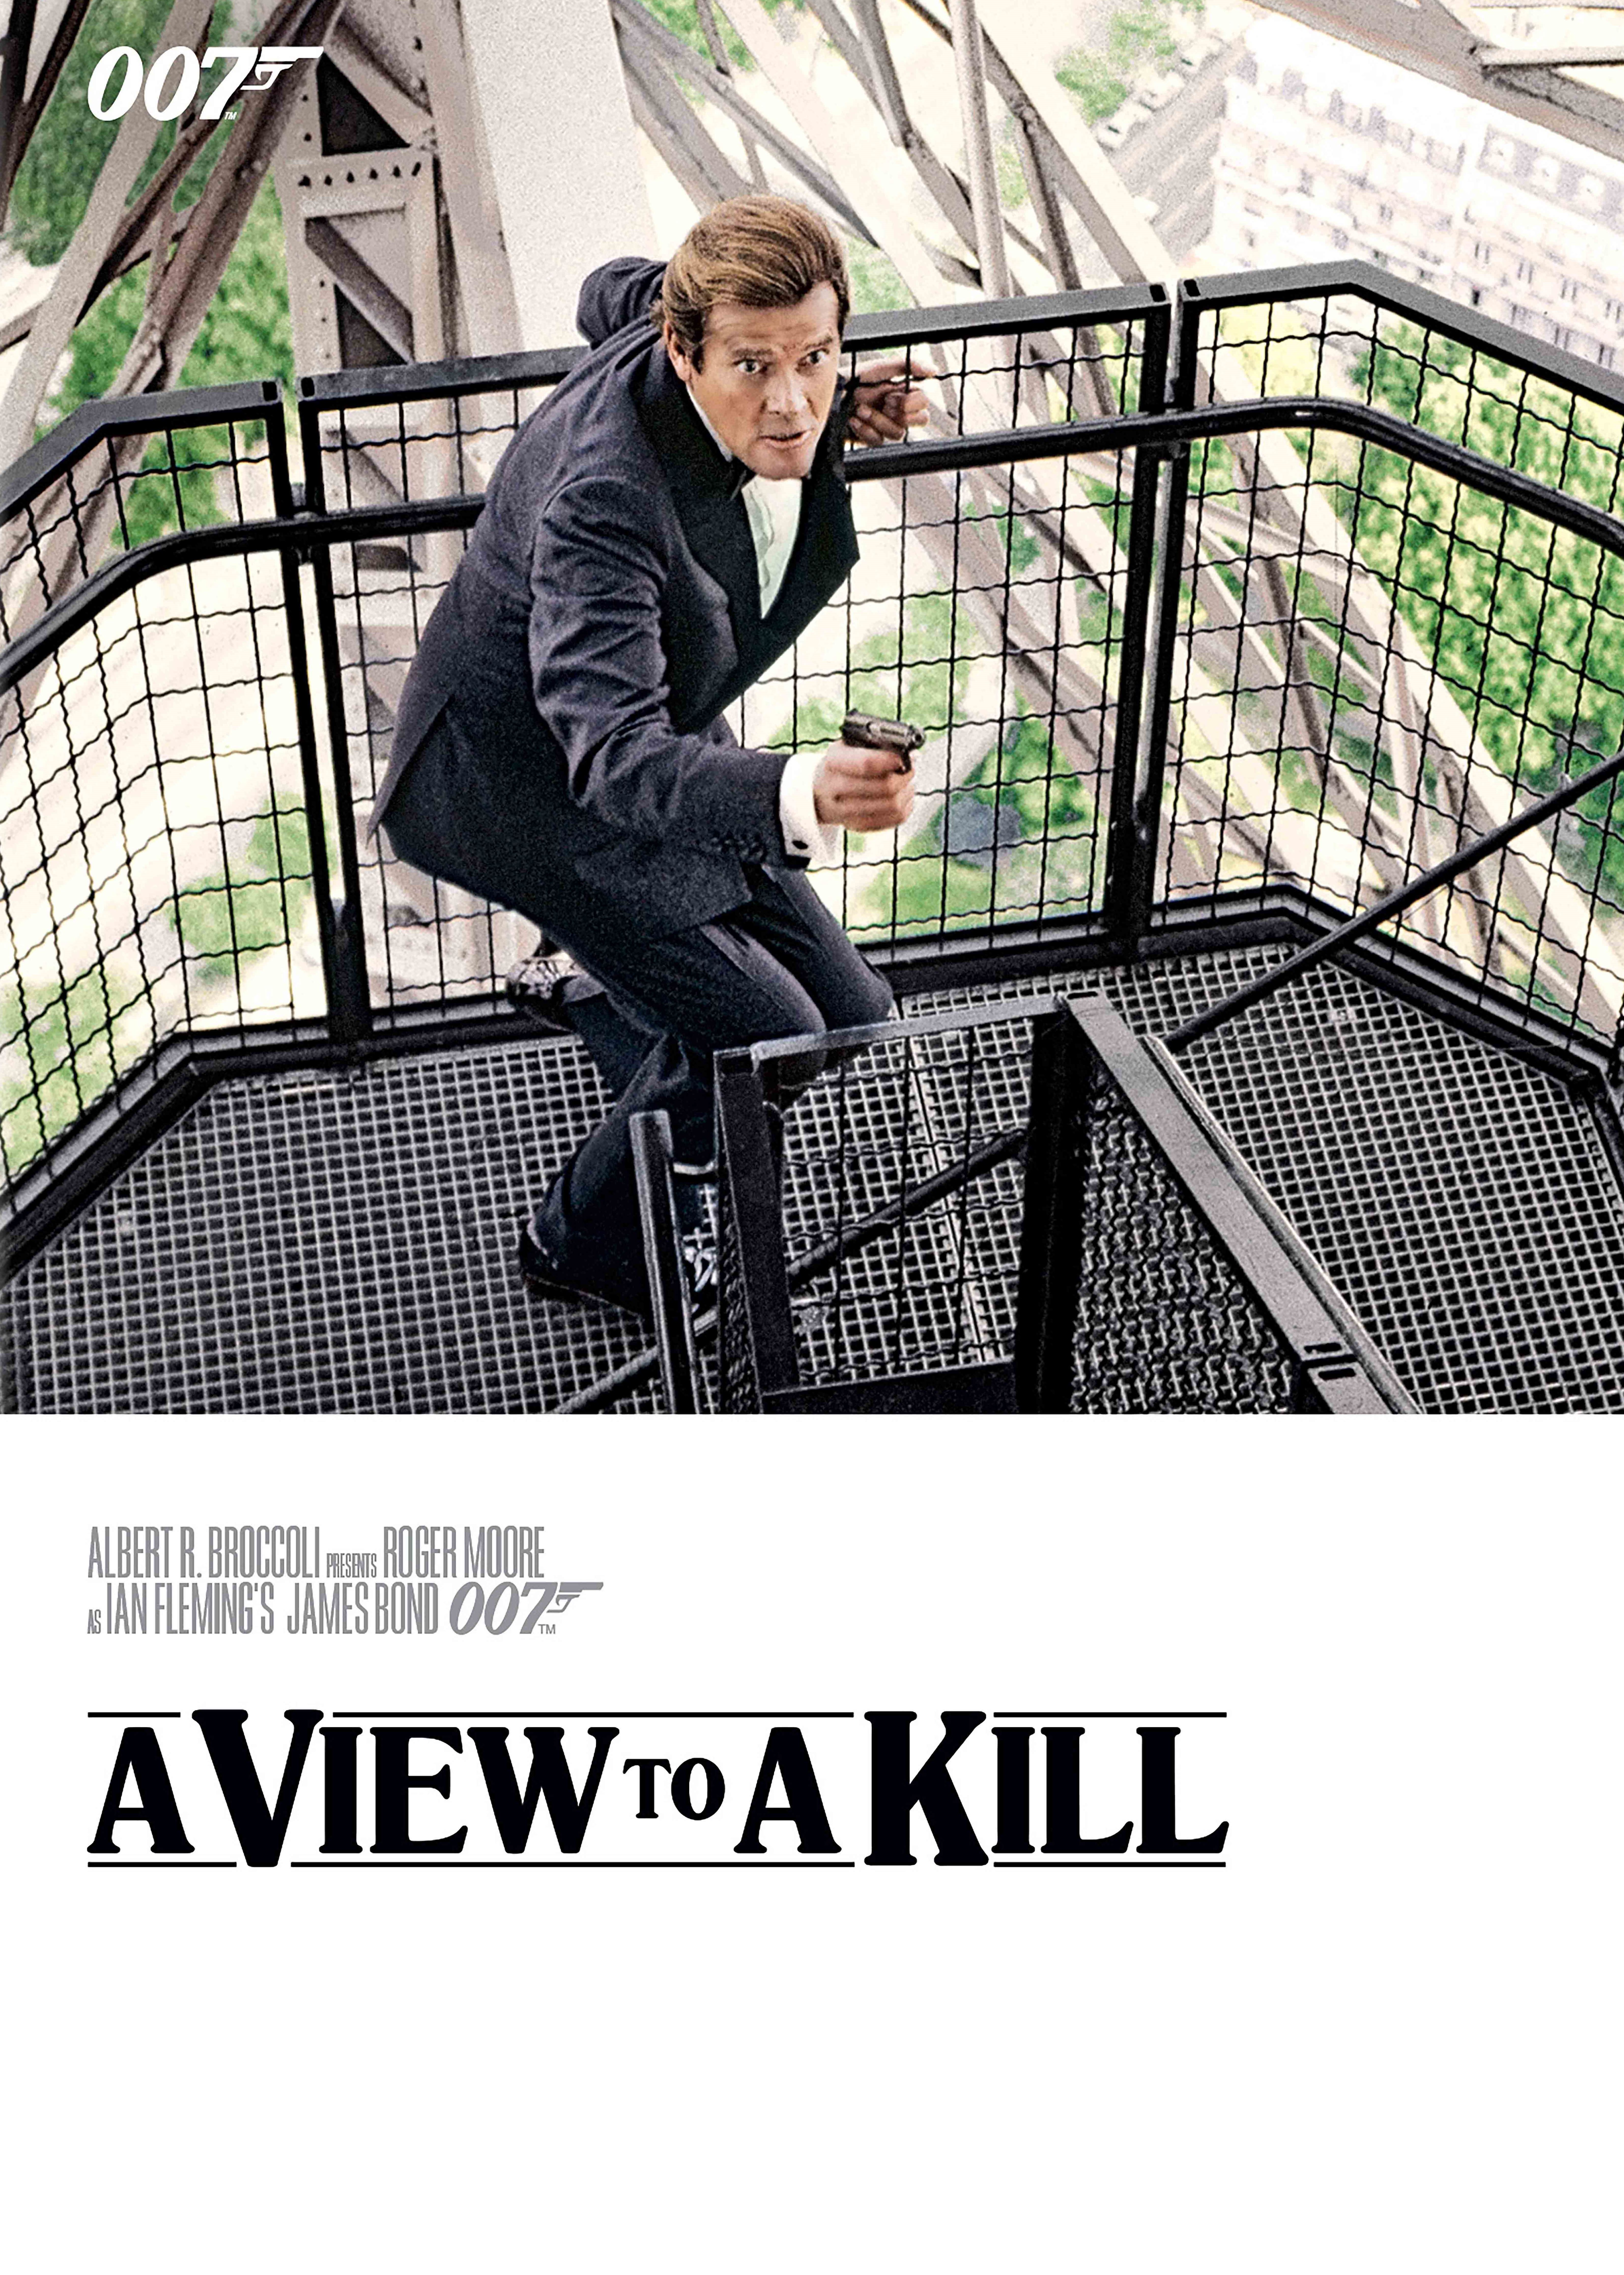 DVD A VIEW TO A KILL NEUF - Photo 1 sur 1